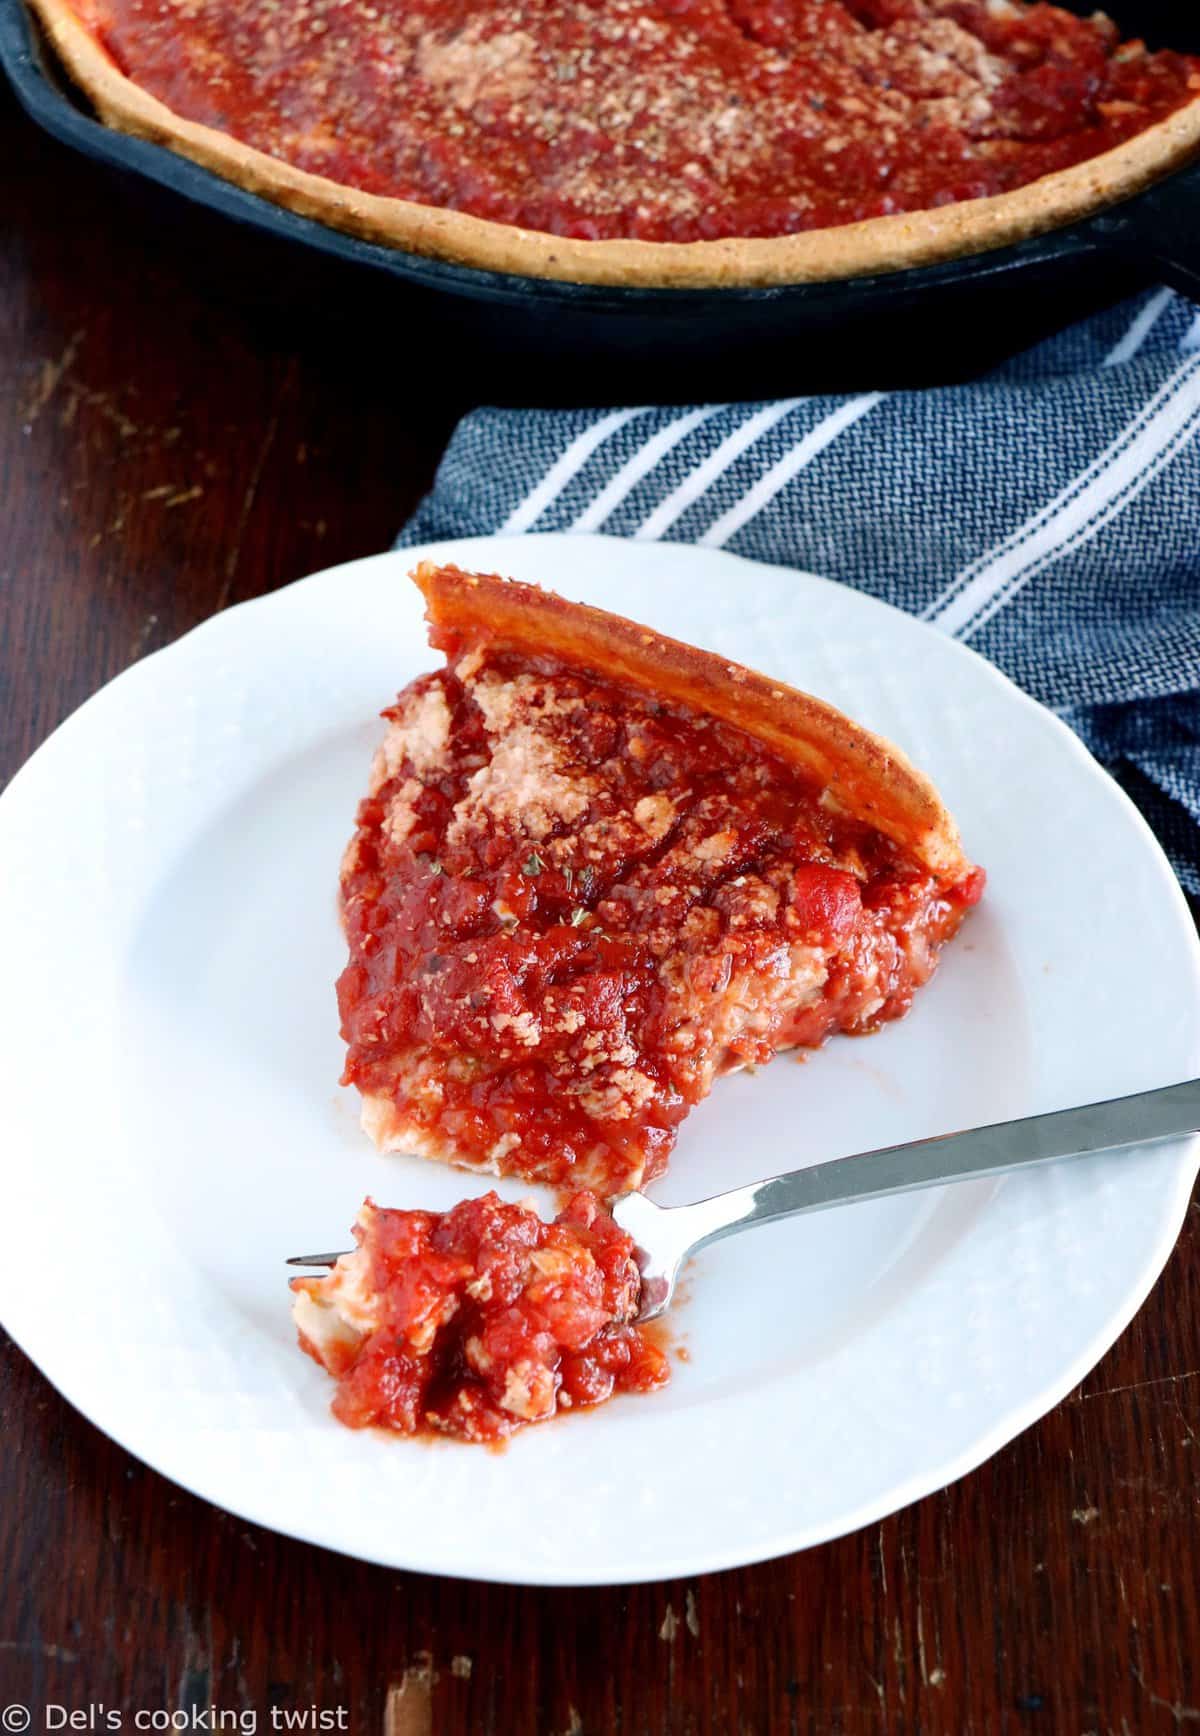 Discover the authentic Chicago-style deep dish pizza, made with a crunchy flaky crust and garnished with thick layers of cheese and tomato sauce.